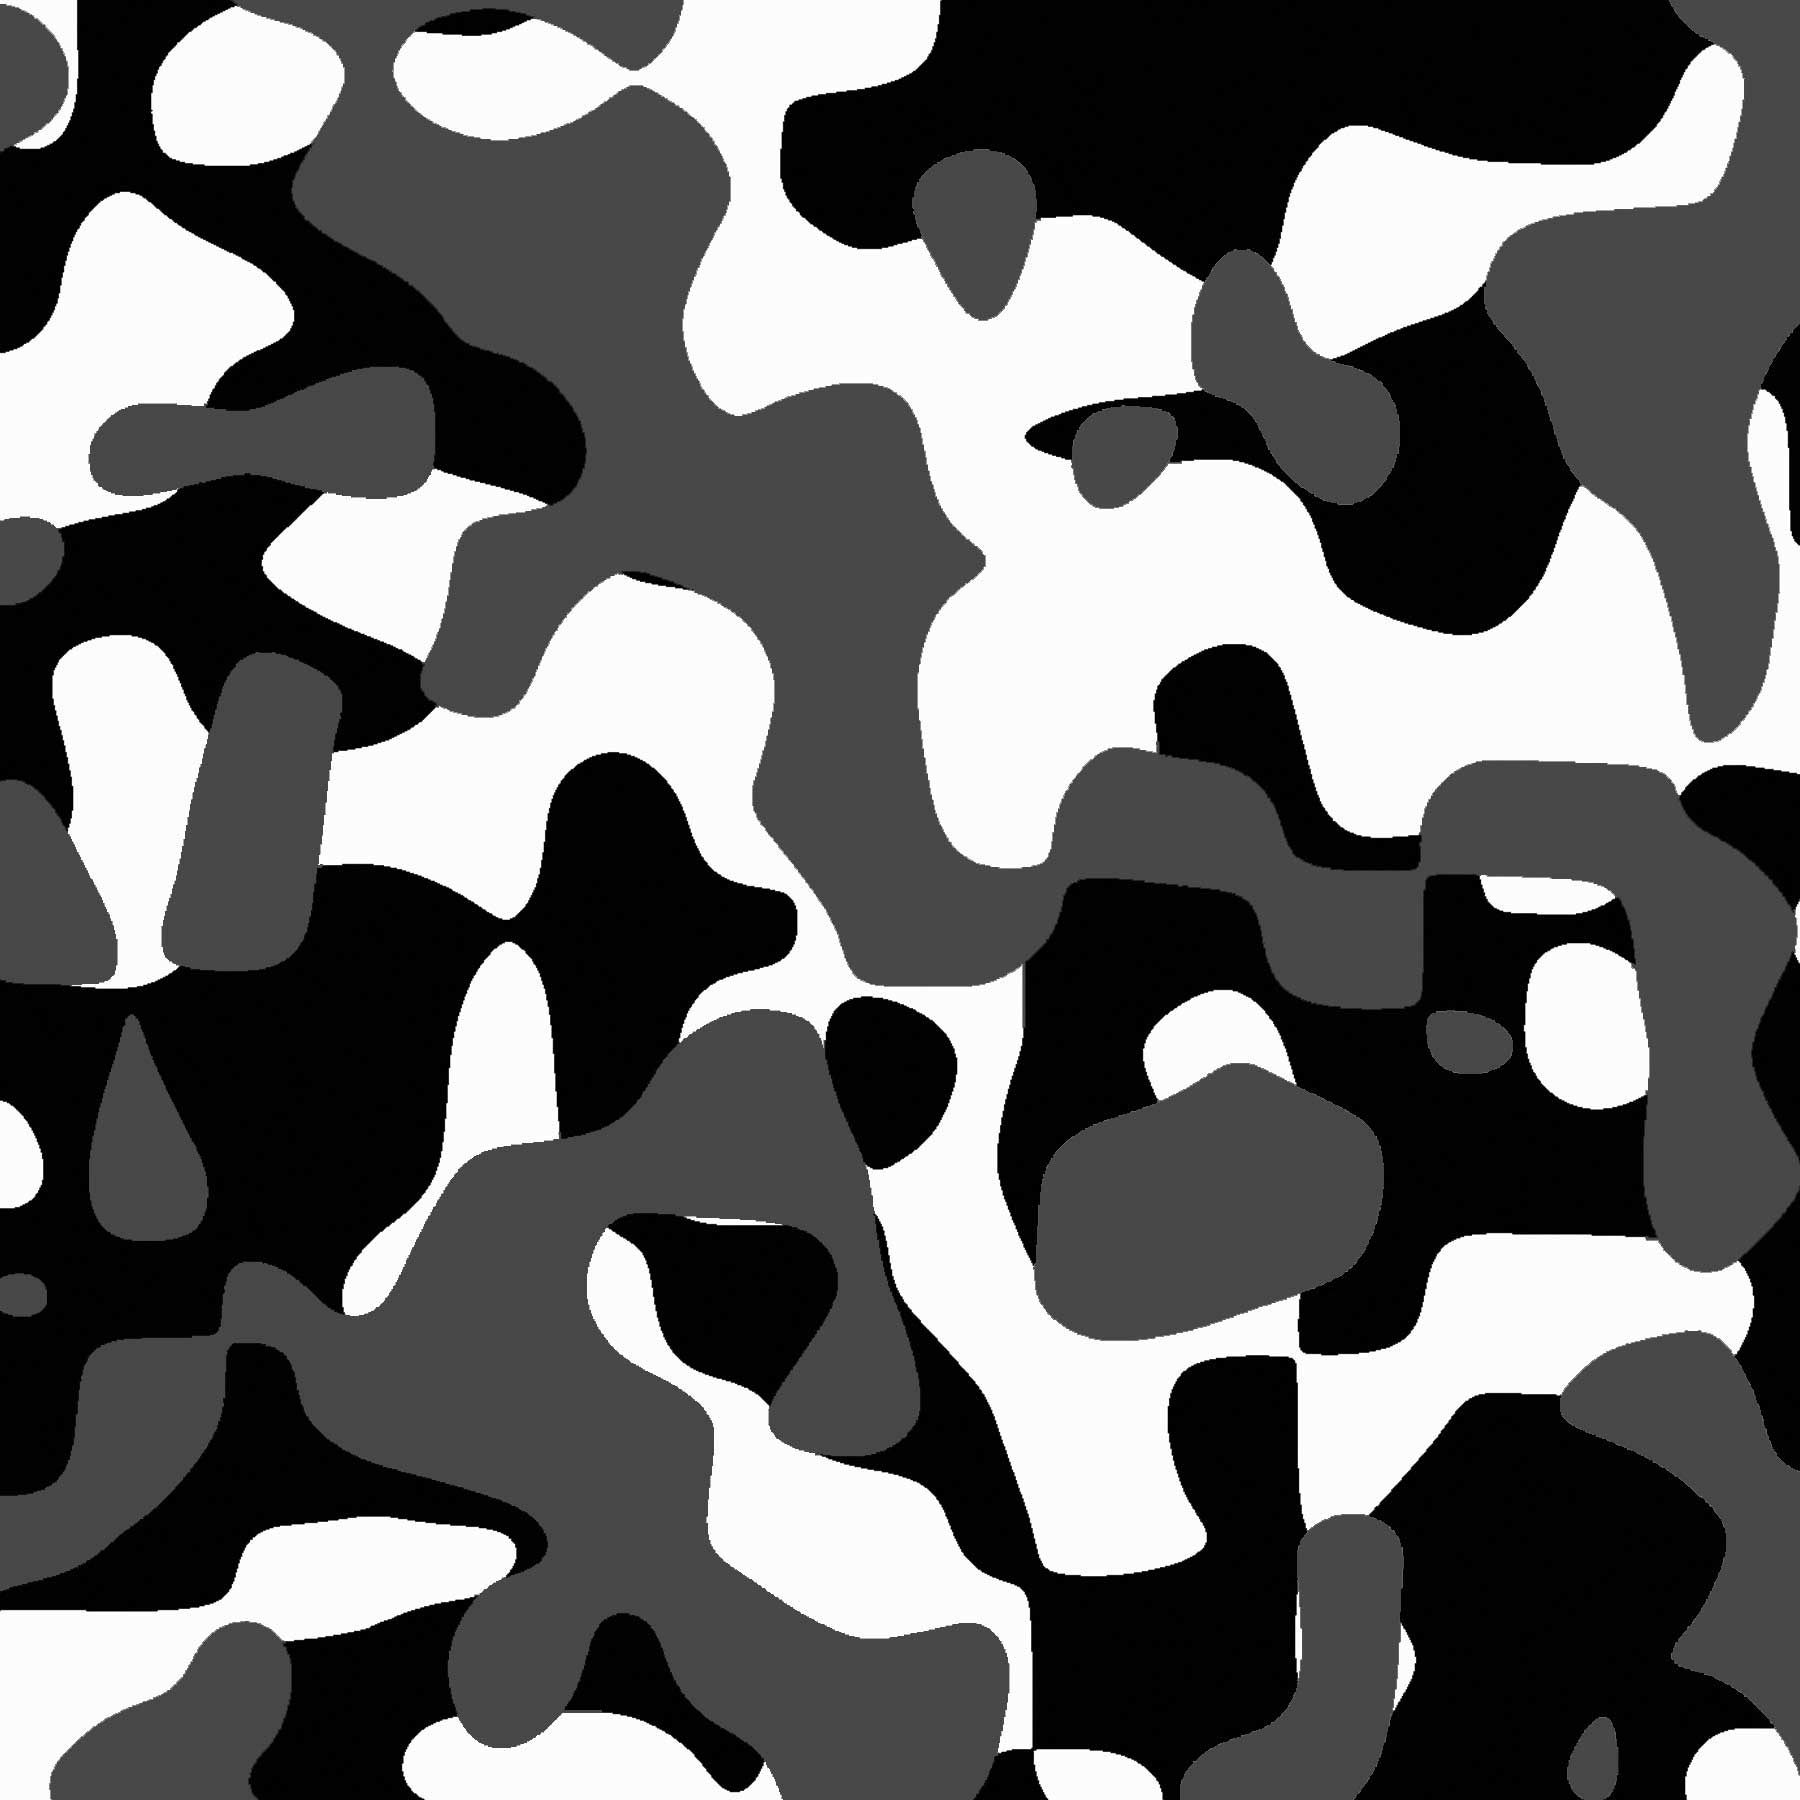 Black Camouflage Wallpapers Wallpaper Cave